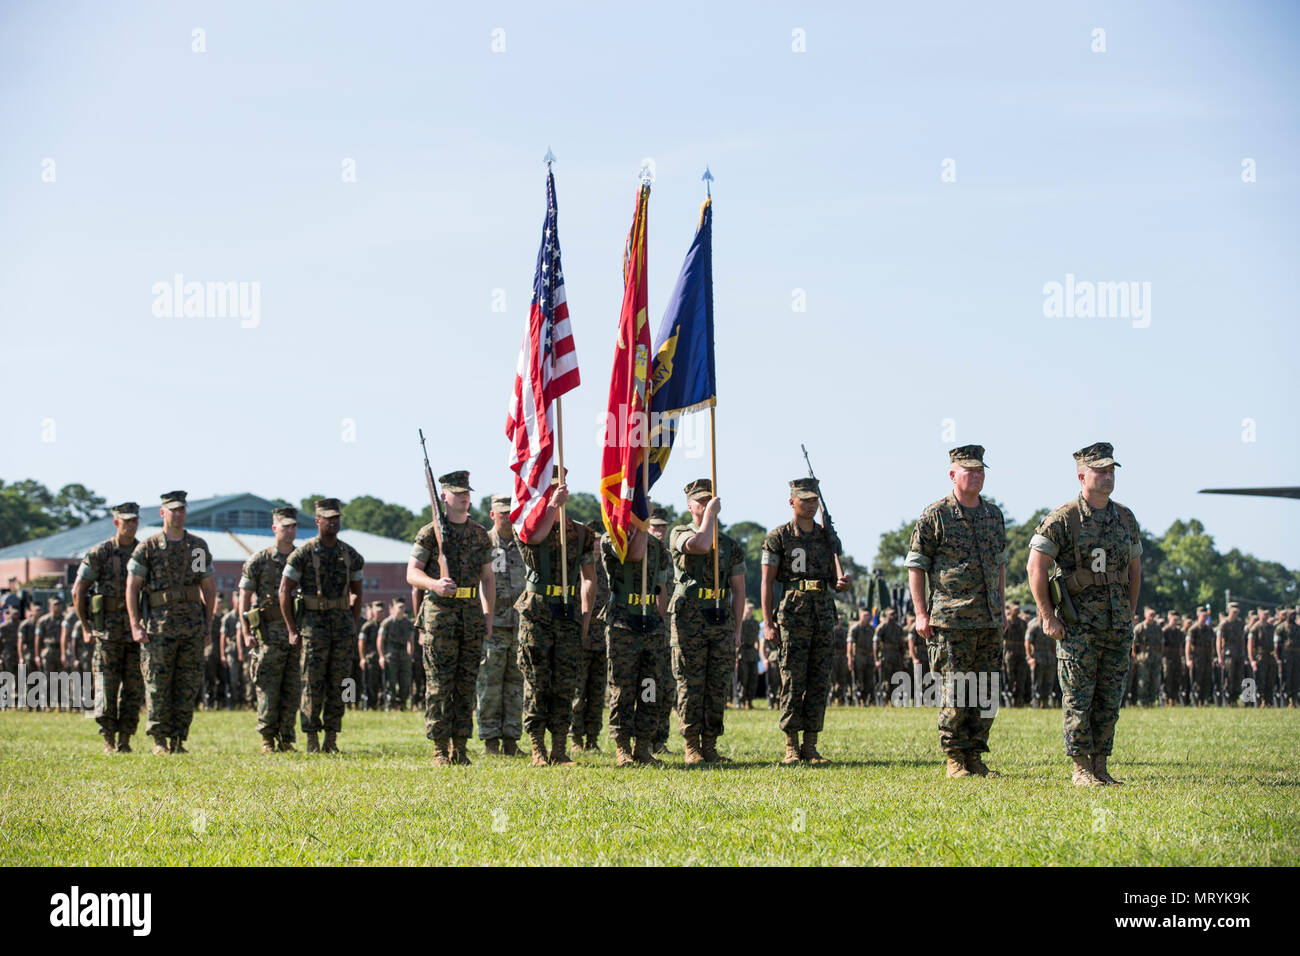 U.S. Marines assigned to II Marine Expeditionary Force (MEF) stand at attention during a change of command ceremony on Camp Lejeune, N.C., July 14, 2017. During the ceremony, Maj. Gen. Walter L. Miller Jr. relinquished his command as commanding general of II MEF to Lt. Gen. Robert F. Hedelund. (U.S. Marine Corps photo by Lance Cpl. Koby I. Saunders) Stock Photo